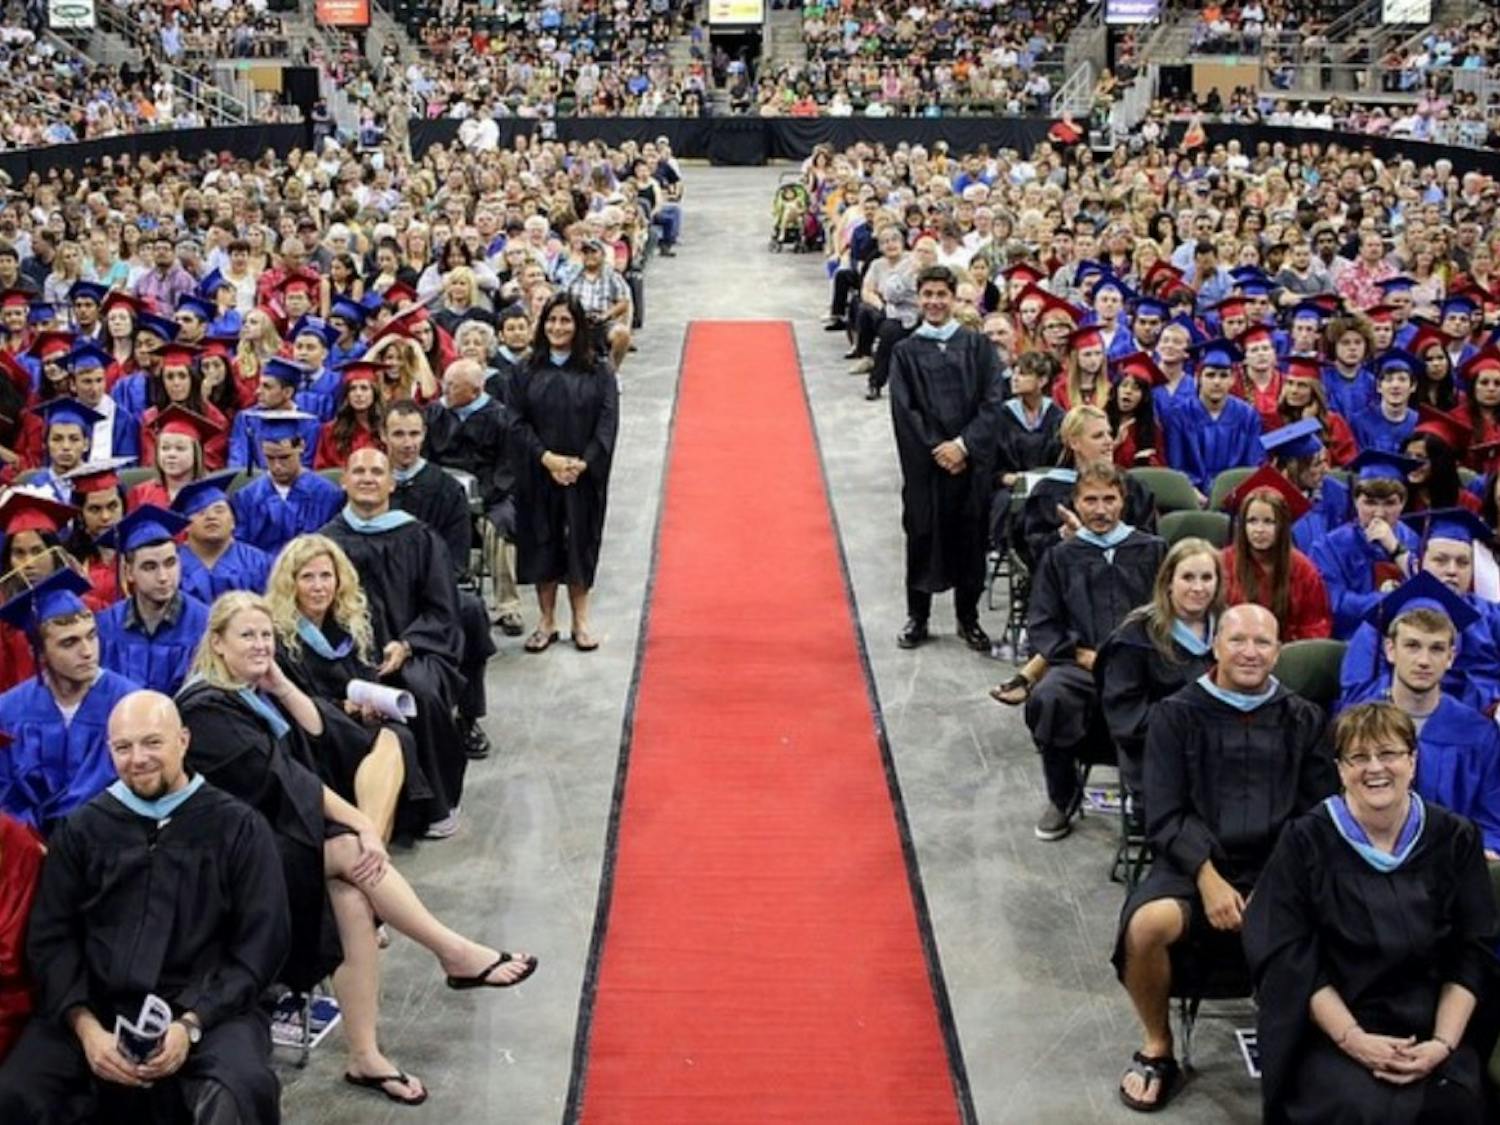 The Eastmont High School class of 2015 graduates from the Town Toyota Center in East Wenatchee, Washington.&nbsp;